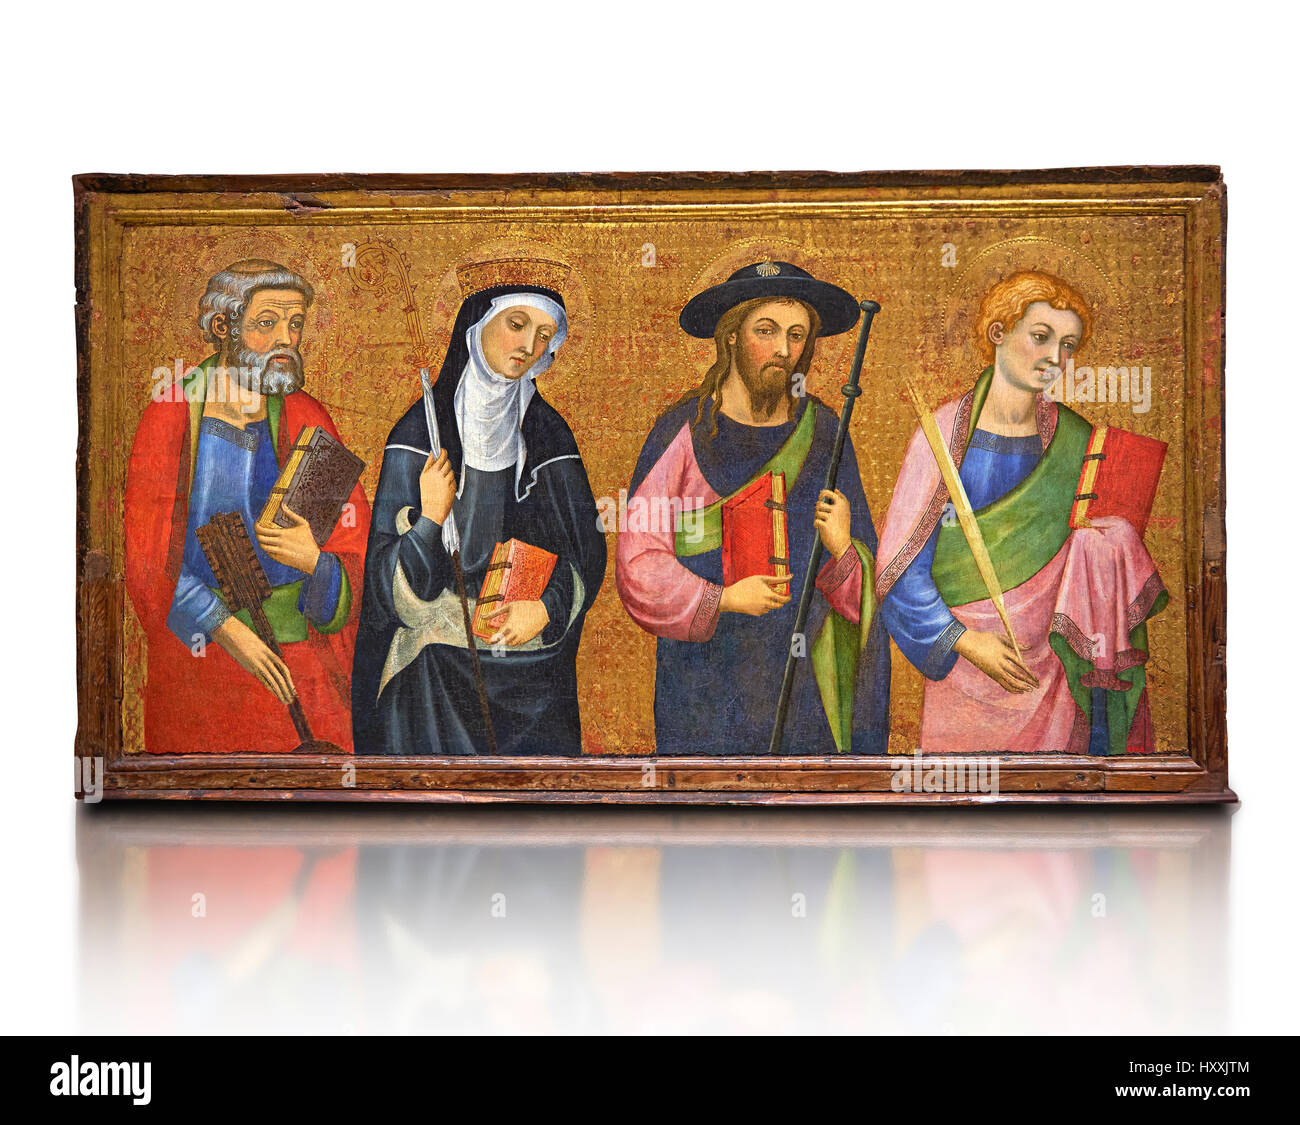 Gothic Altar panel, from Left - St Peter, St Clara, St James Greater, St. John. C.1385 by Pere Serra,  Cathedral of Tortosa. Inv MNAC 3950, 3948, 3949 Stock Photo